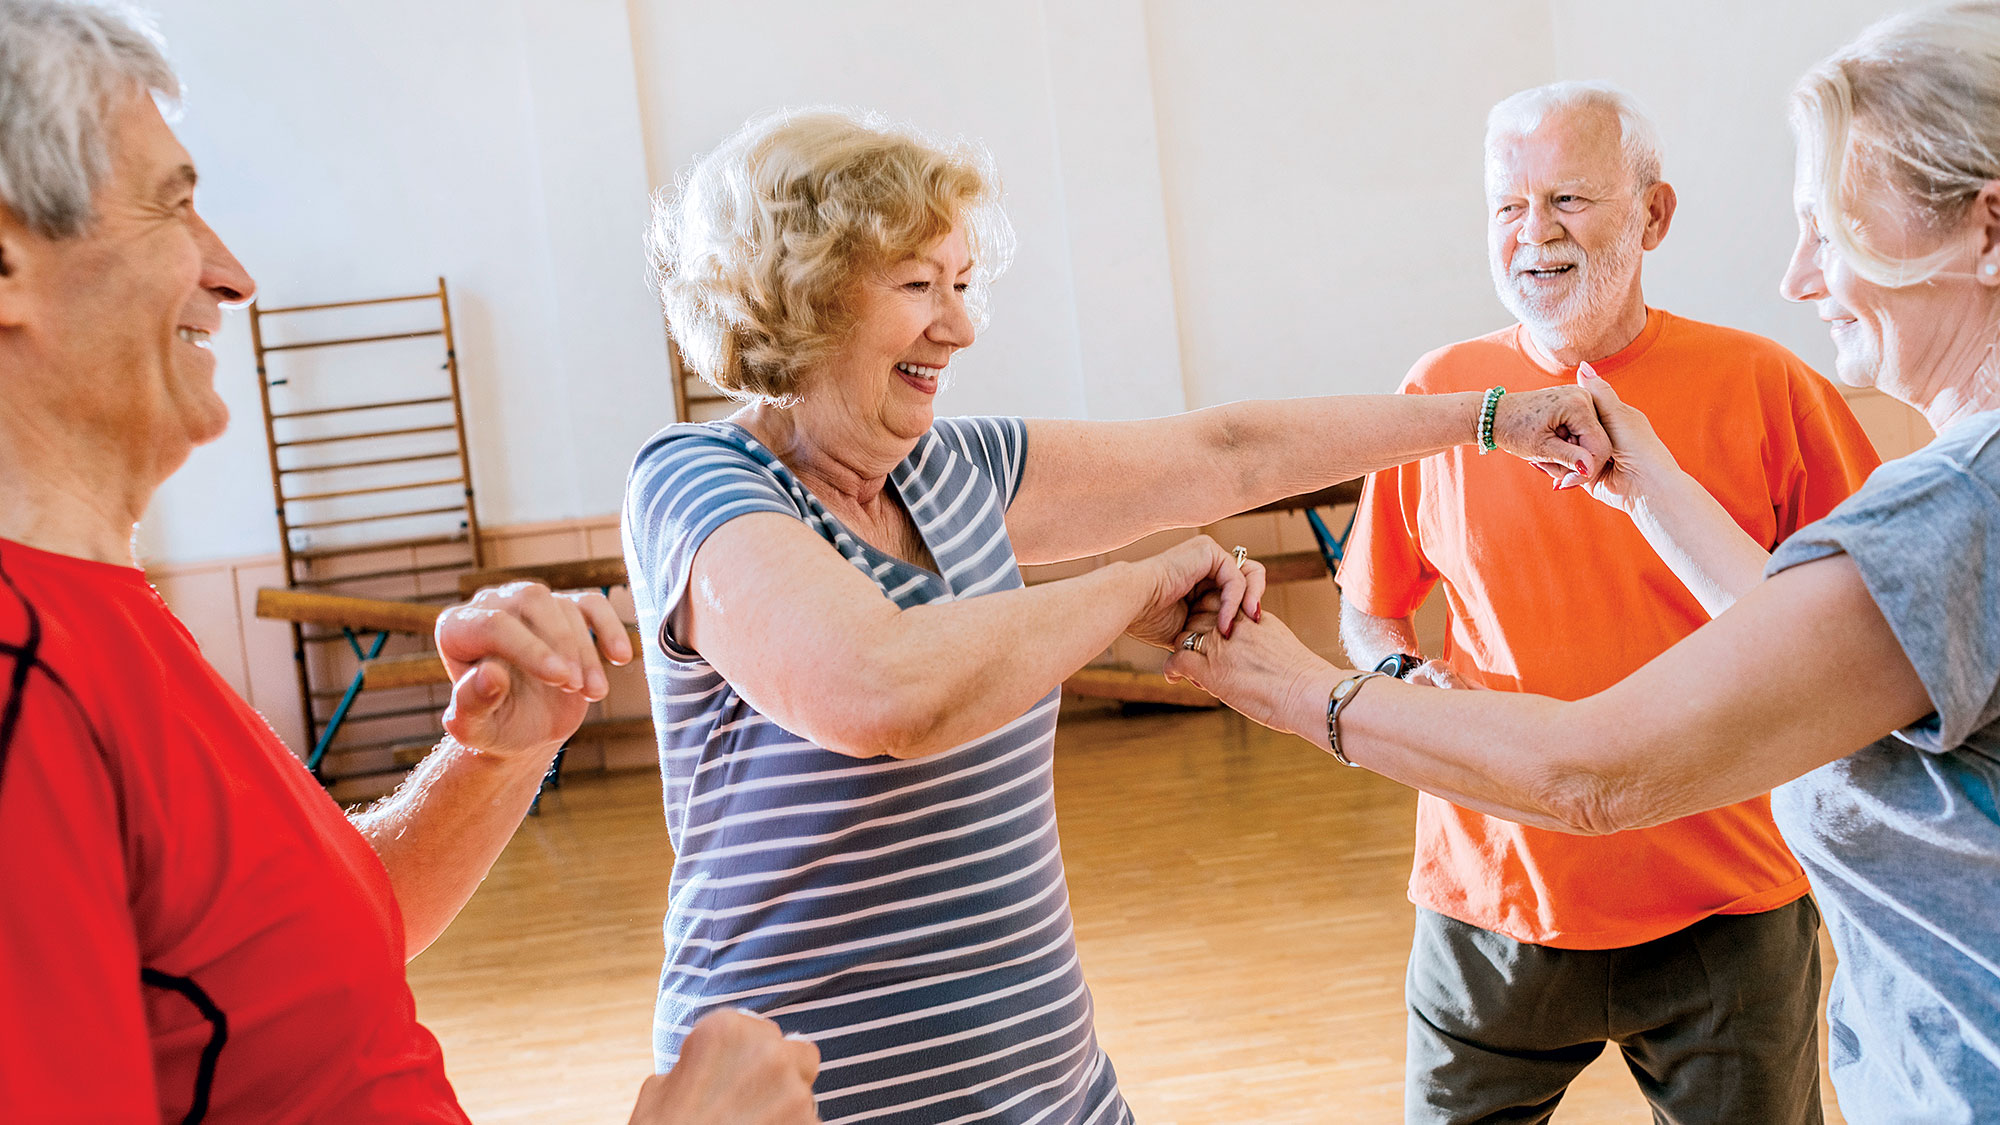 Online dance sessions beneficial to unpaid carers